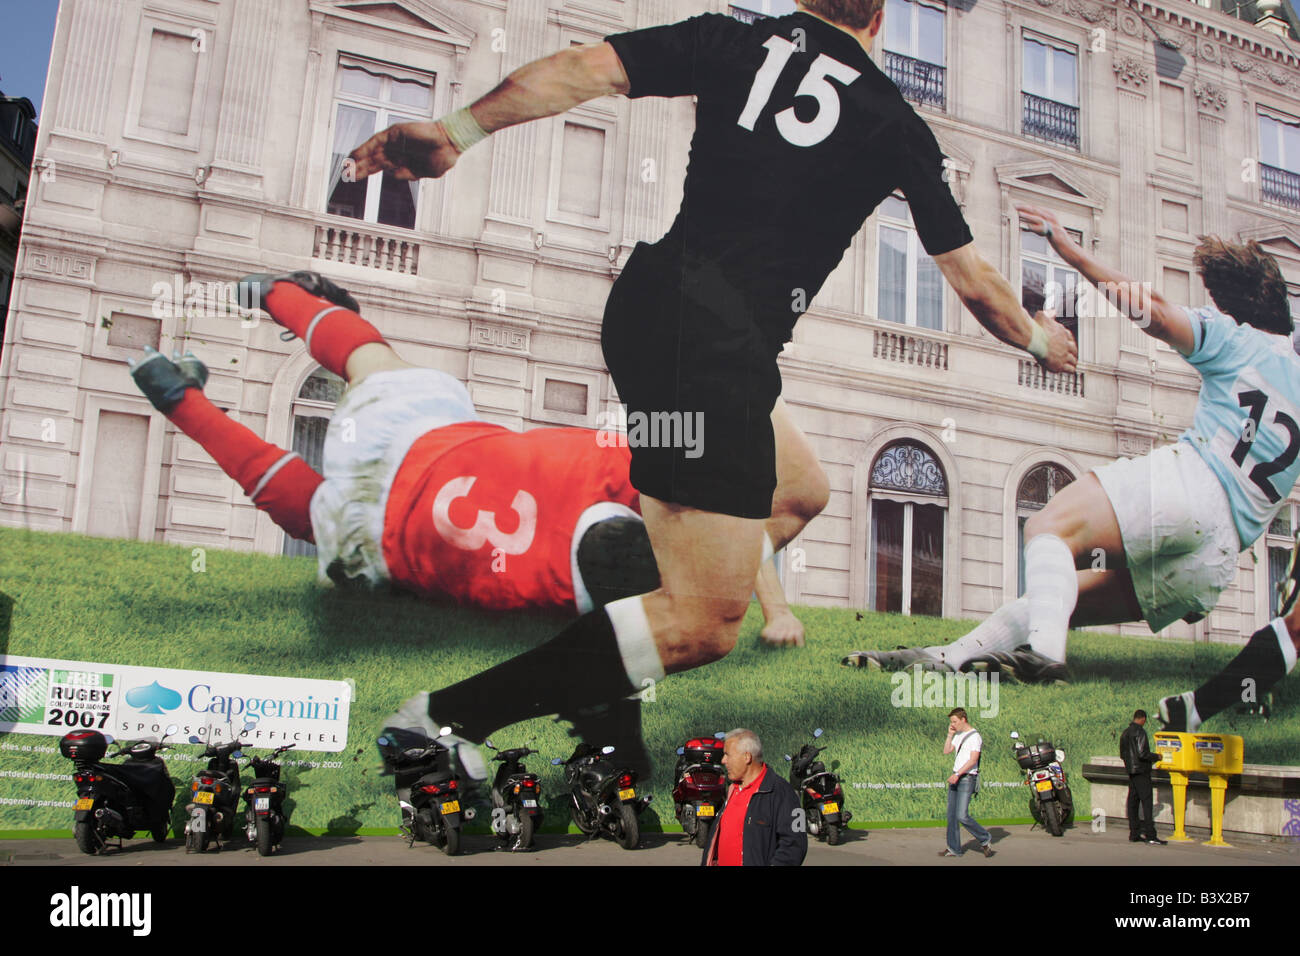 paris street nearby the arc de triomphe during the rugby world cup in 2007 Gigant poster and street scenes Stock Photo